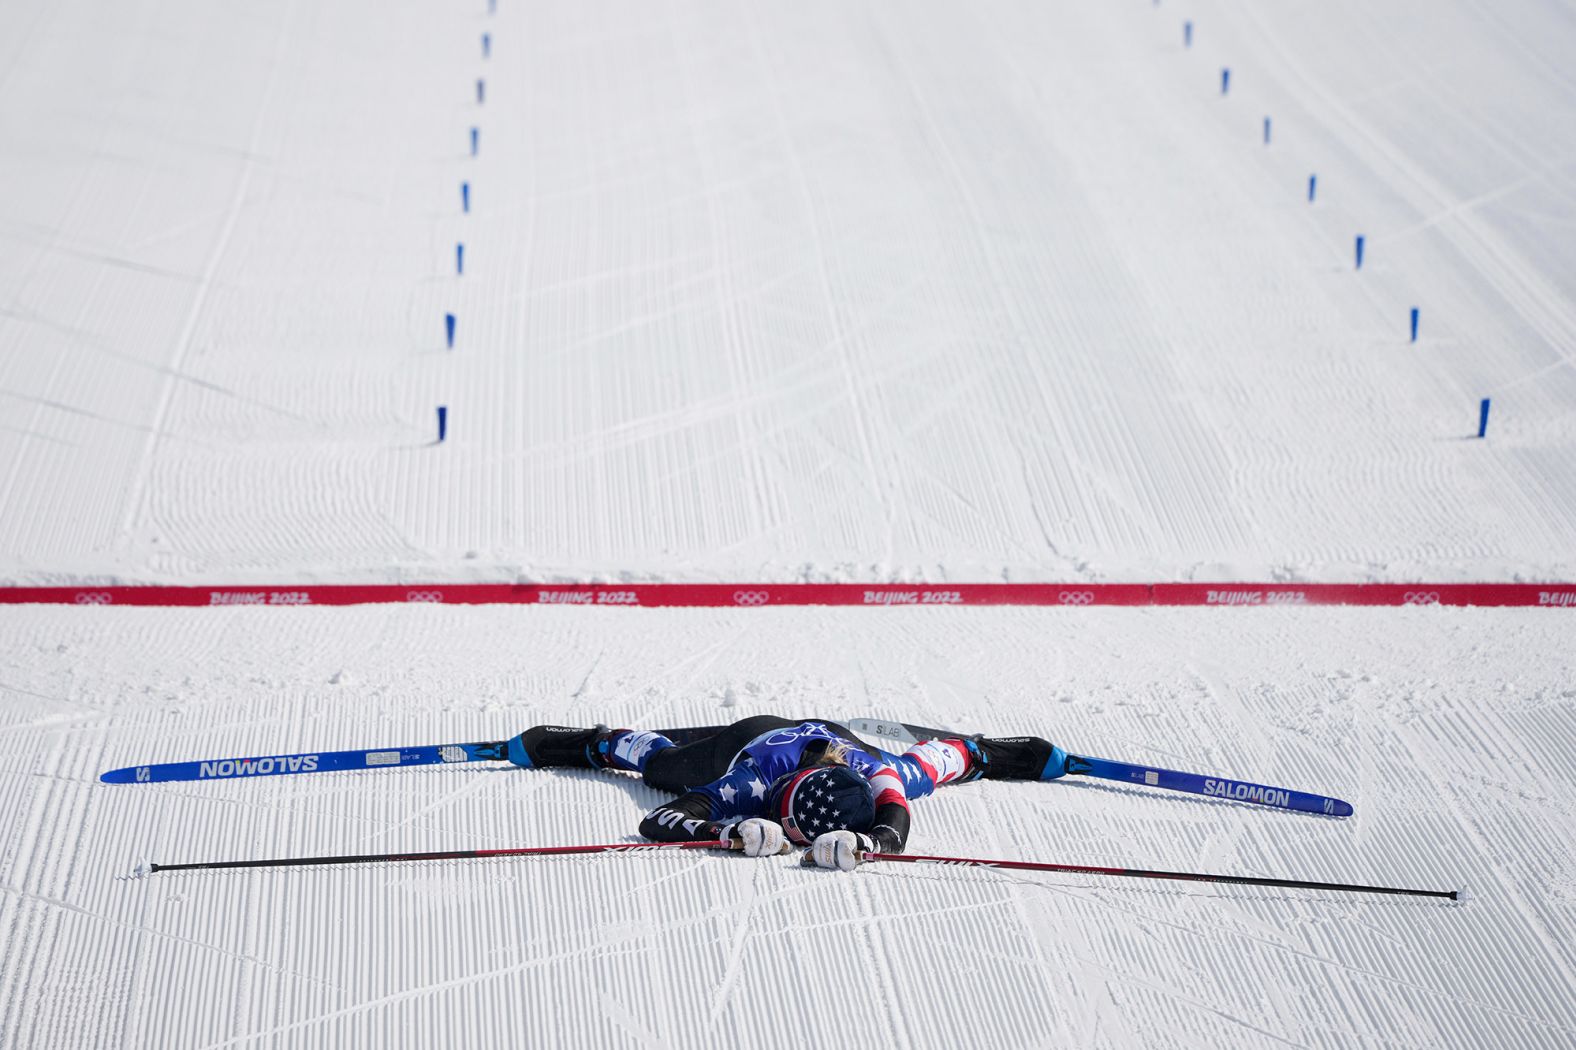 American cross-country skier Jessie Diggins lies on the snow after crossing the finish line of the 30-kilometer mass start event on February 20. She won the silver, finishing behind Norway's Therese Johaug, <a href="index.php?page=&url=https%3A%2F%2Fwww.cnn.com%2Fworld%2Flive-news%2Fbeijing-winter-olympics-02-20-22-spt%2Fh_459dffb5602658671f58821f247f24ec" target="_blank">and she revealed that she had been suffering from food poisoning</a> just 30 hours beforehand.